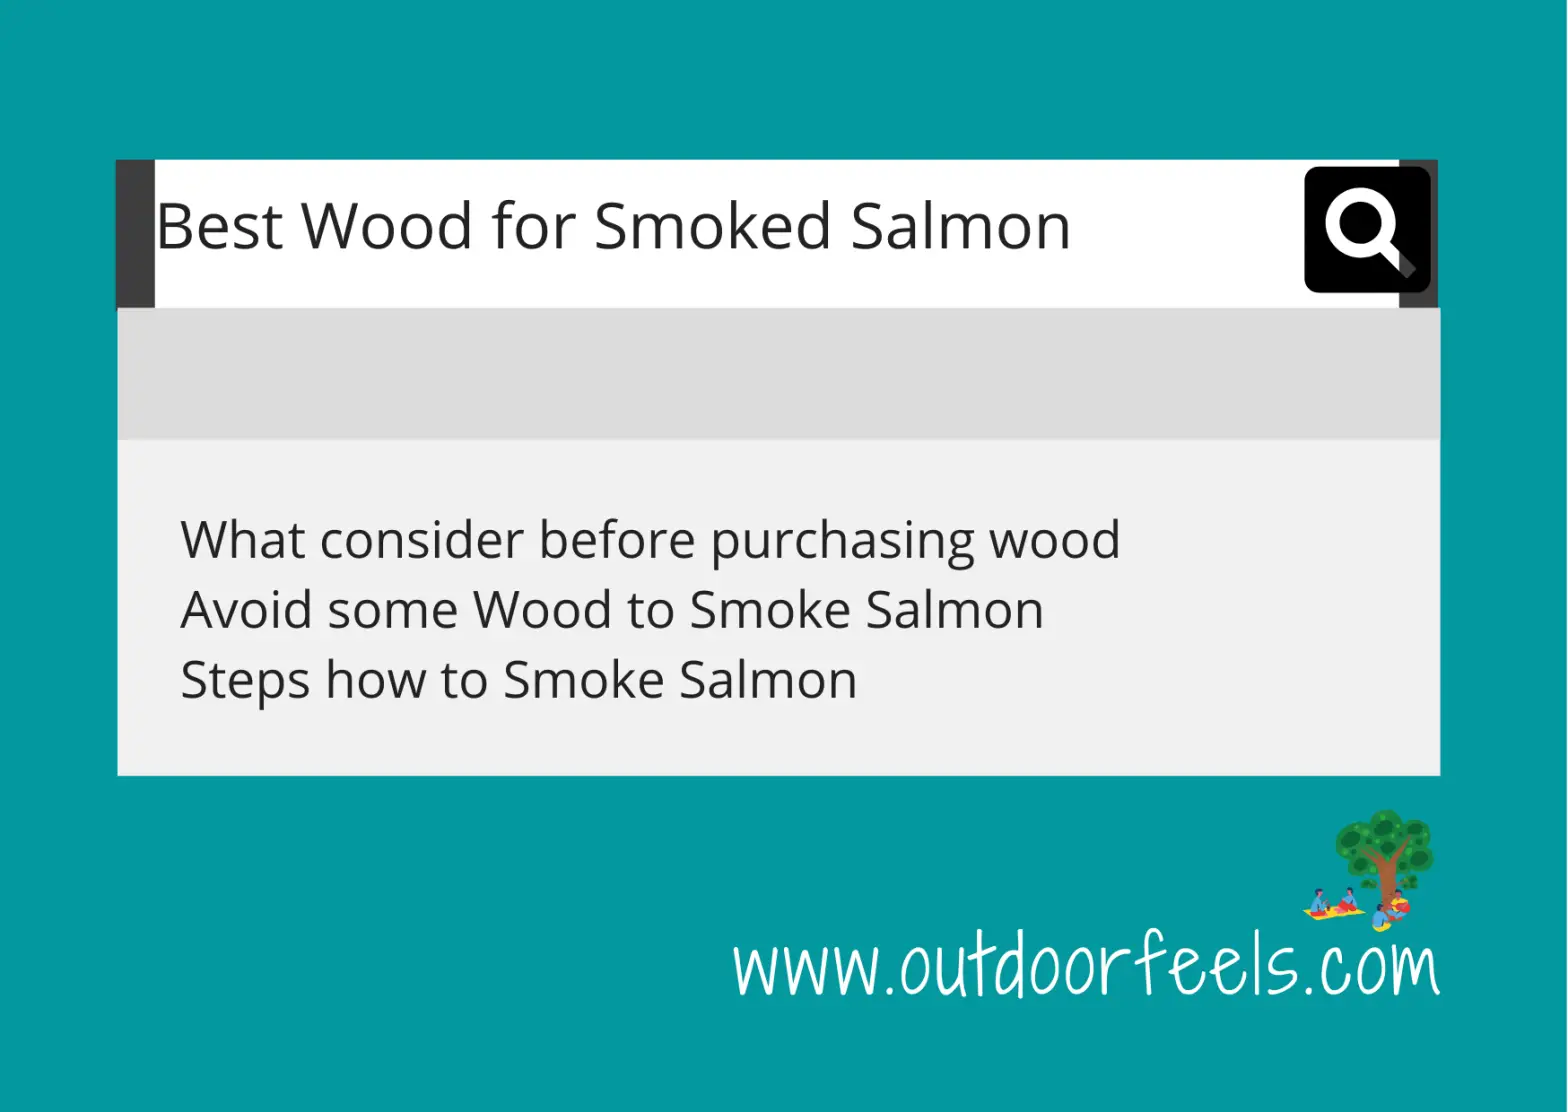 Best Wood for Smoked Salmon